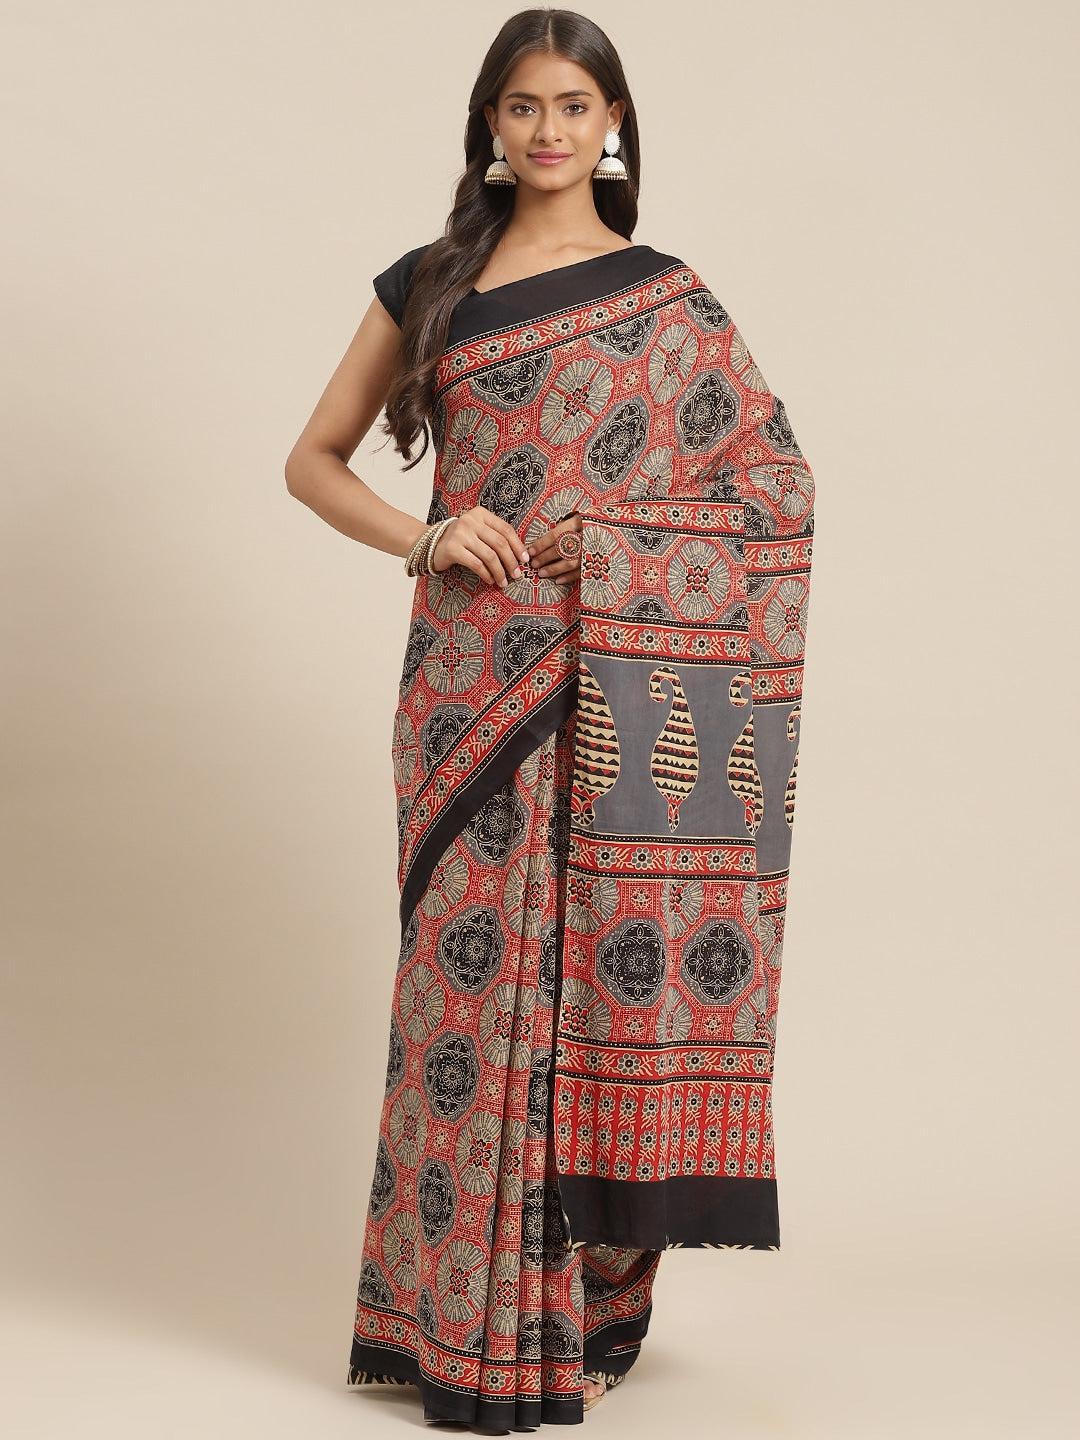 red-olive-green-printed-saree-10122055GR, Women Indian Ethnic Clothing, Cotton Saree